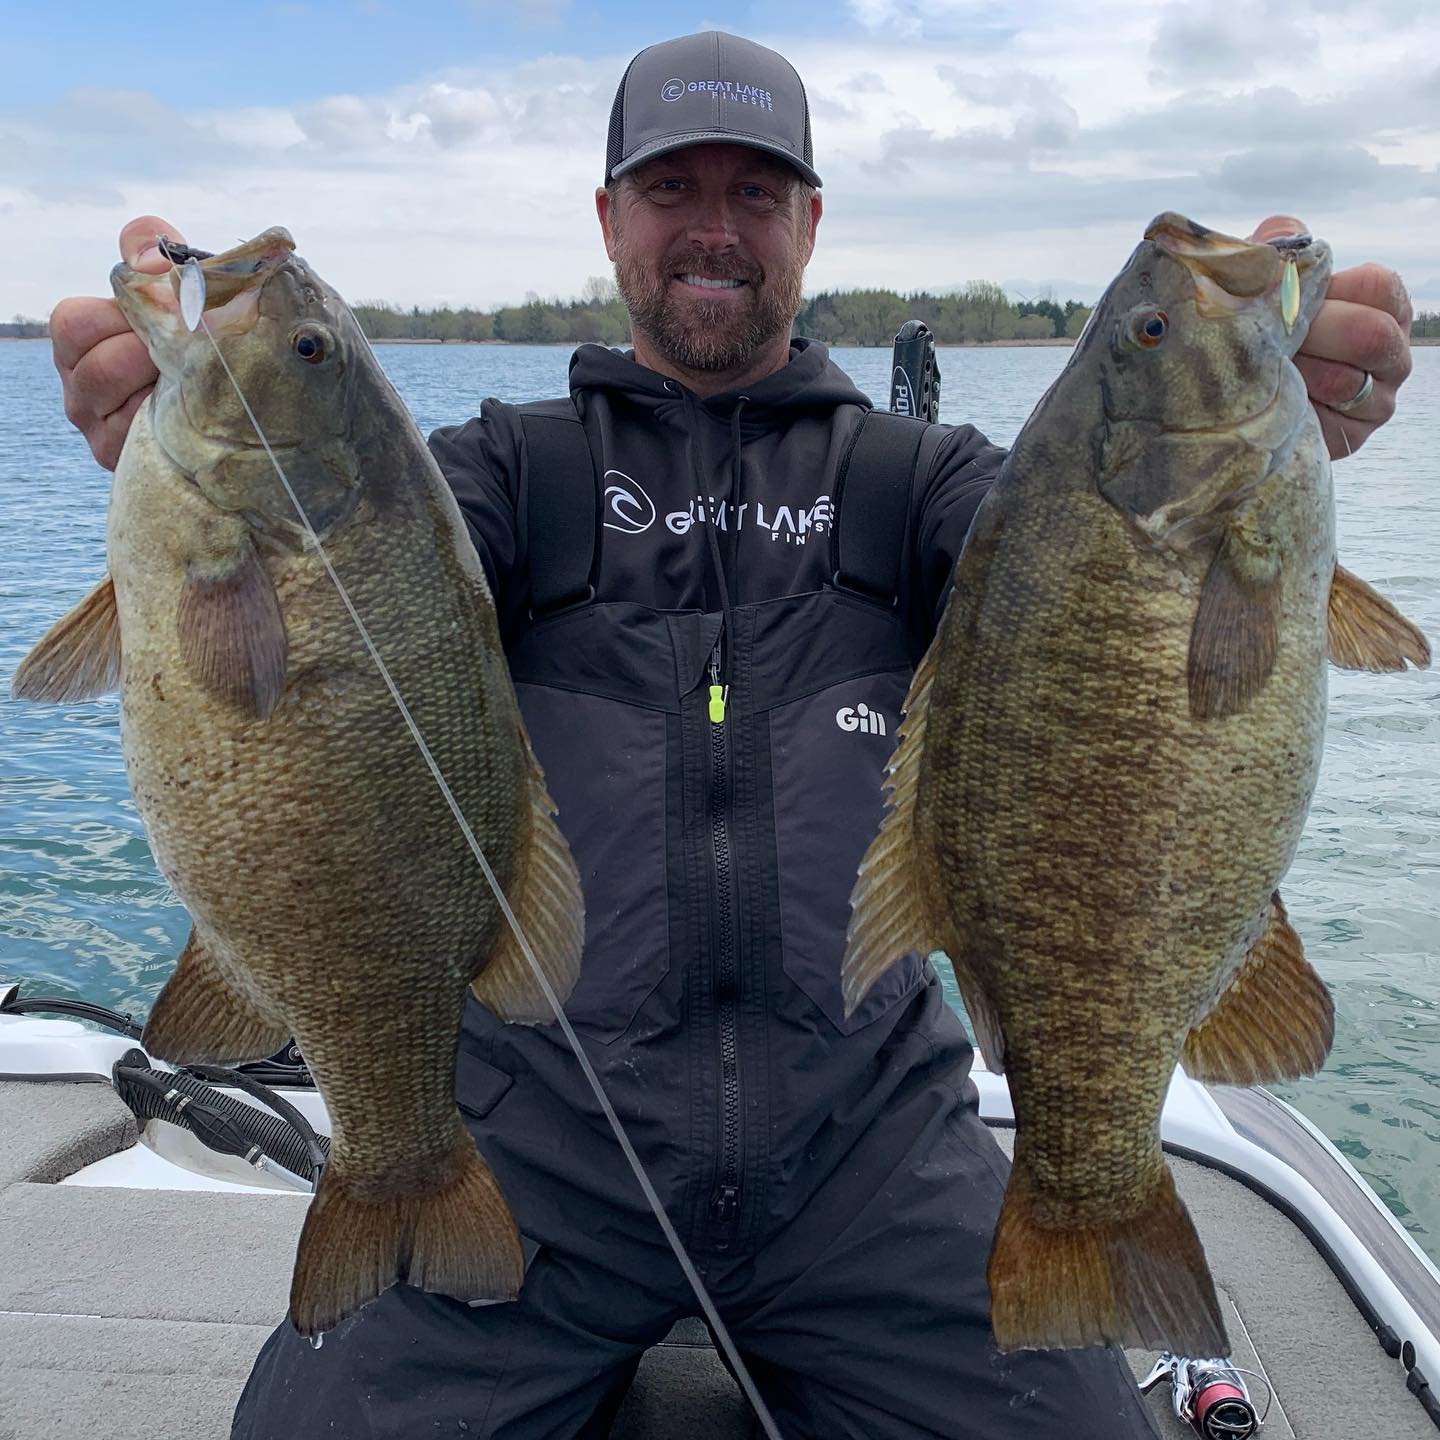 🤯😳 ❌2️⃣ Double header Sneaky Underspin GIANTS! 7.3lbs on the right and 6.1lbs on the left. That 2.75&rdquo; Drop Minnow trailer is so subtle but incredible as a finesse underspin trailer! 

Baits: 3/16oz Sneaky Underspins in both matte black silver